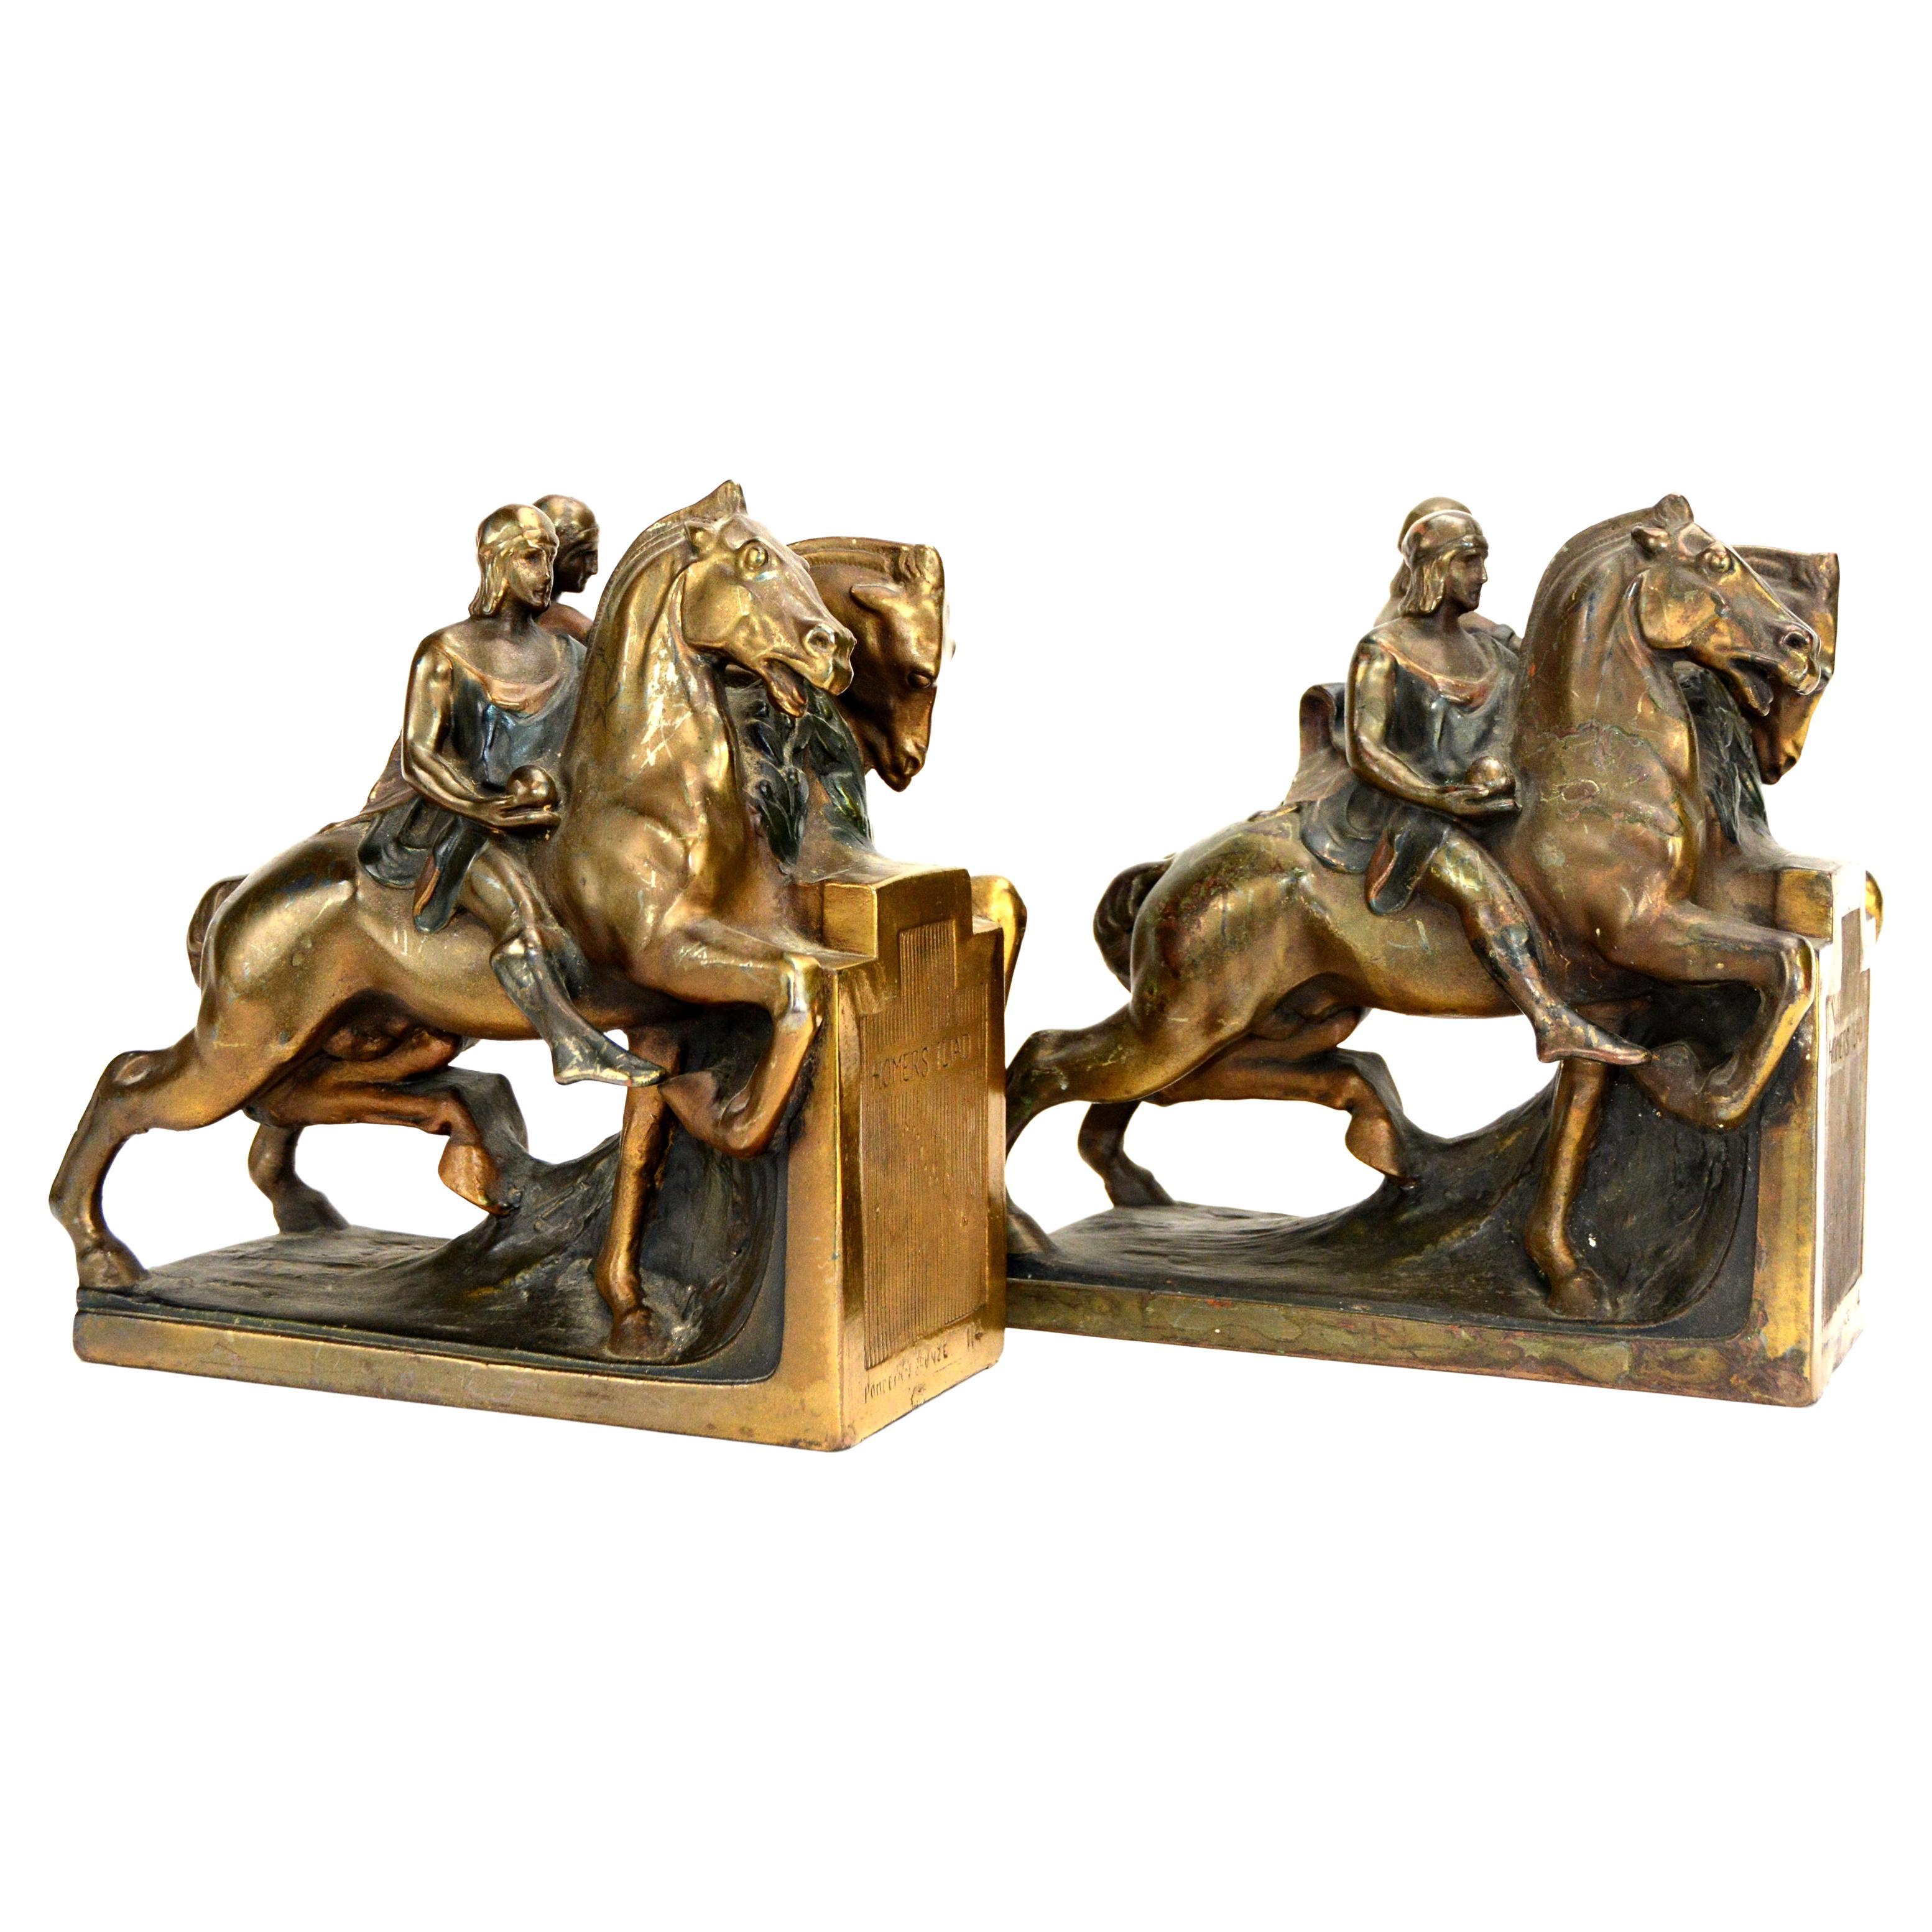 For your consideration is an antique pair of Homer's Iliad bronze bookends. It's made around 1924, yet still has its beautiful original colors. Please note this is an original antique by Pompeian Bronze, not a reproduction that commonly found